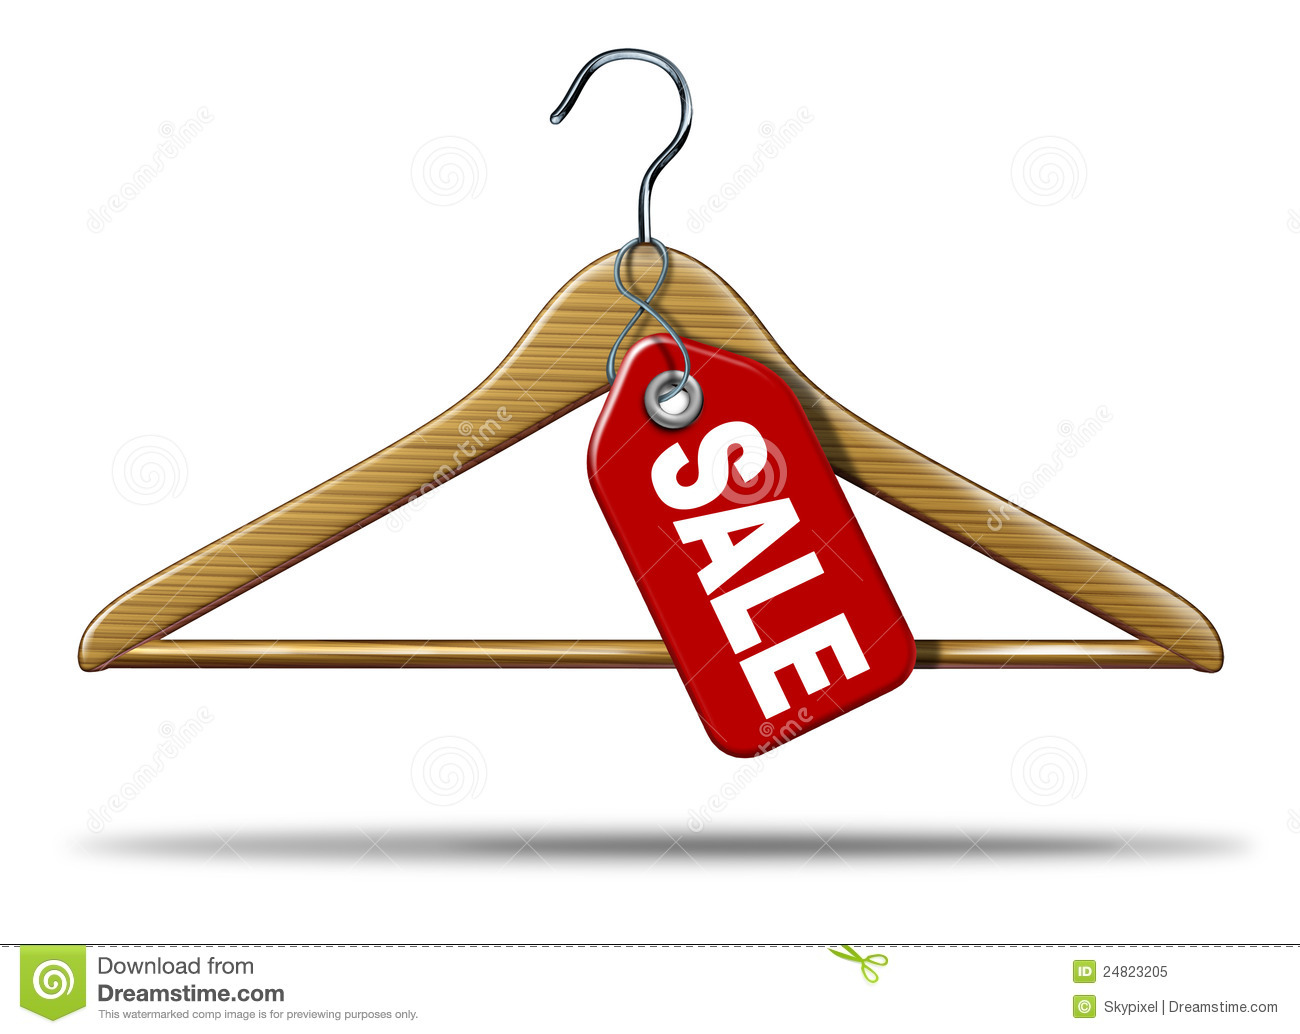 Clothing Sale With A Clothing Hanger And A Red Price Tag Hanging As A